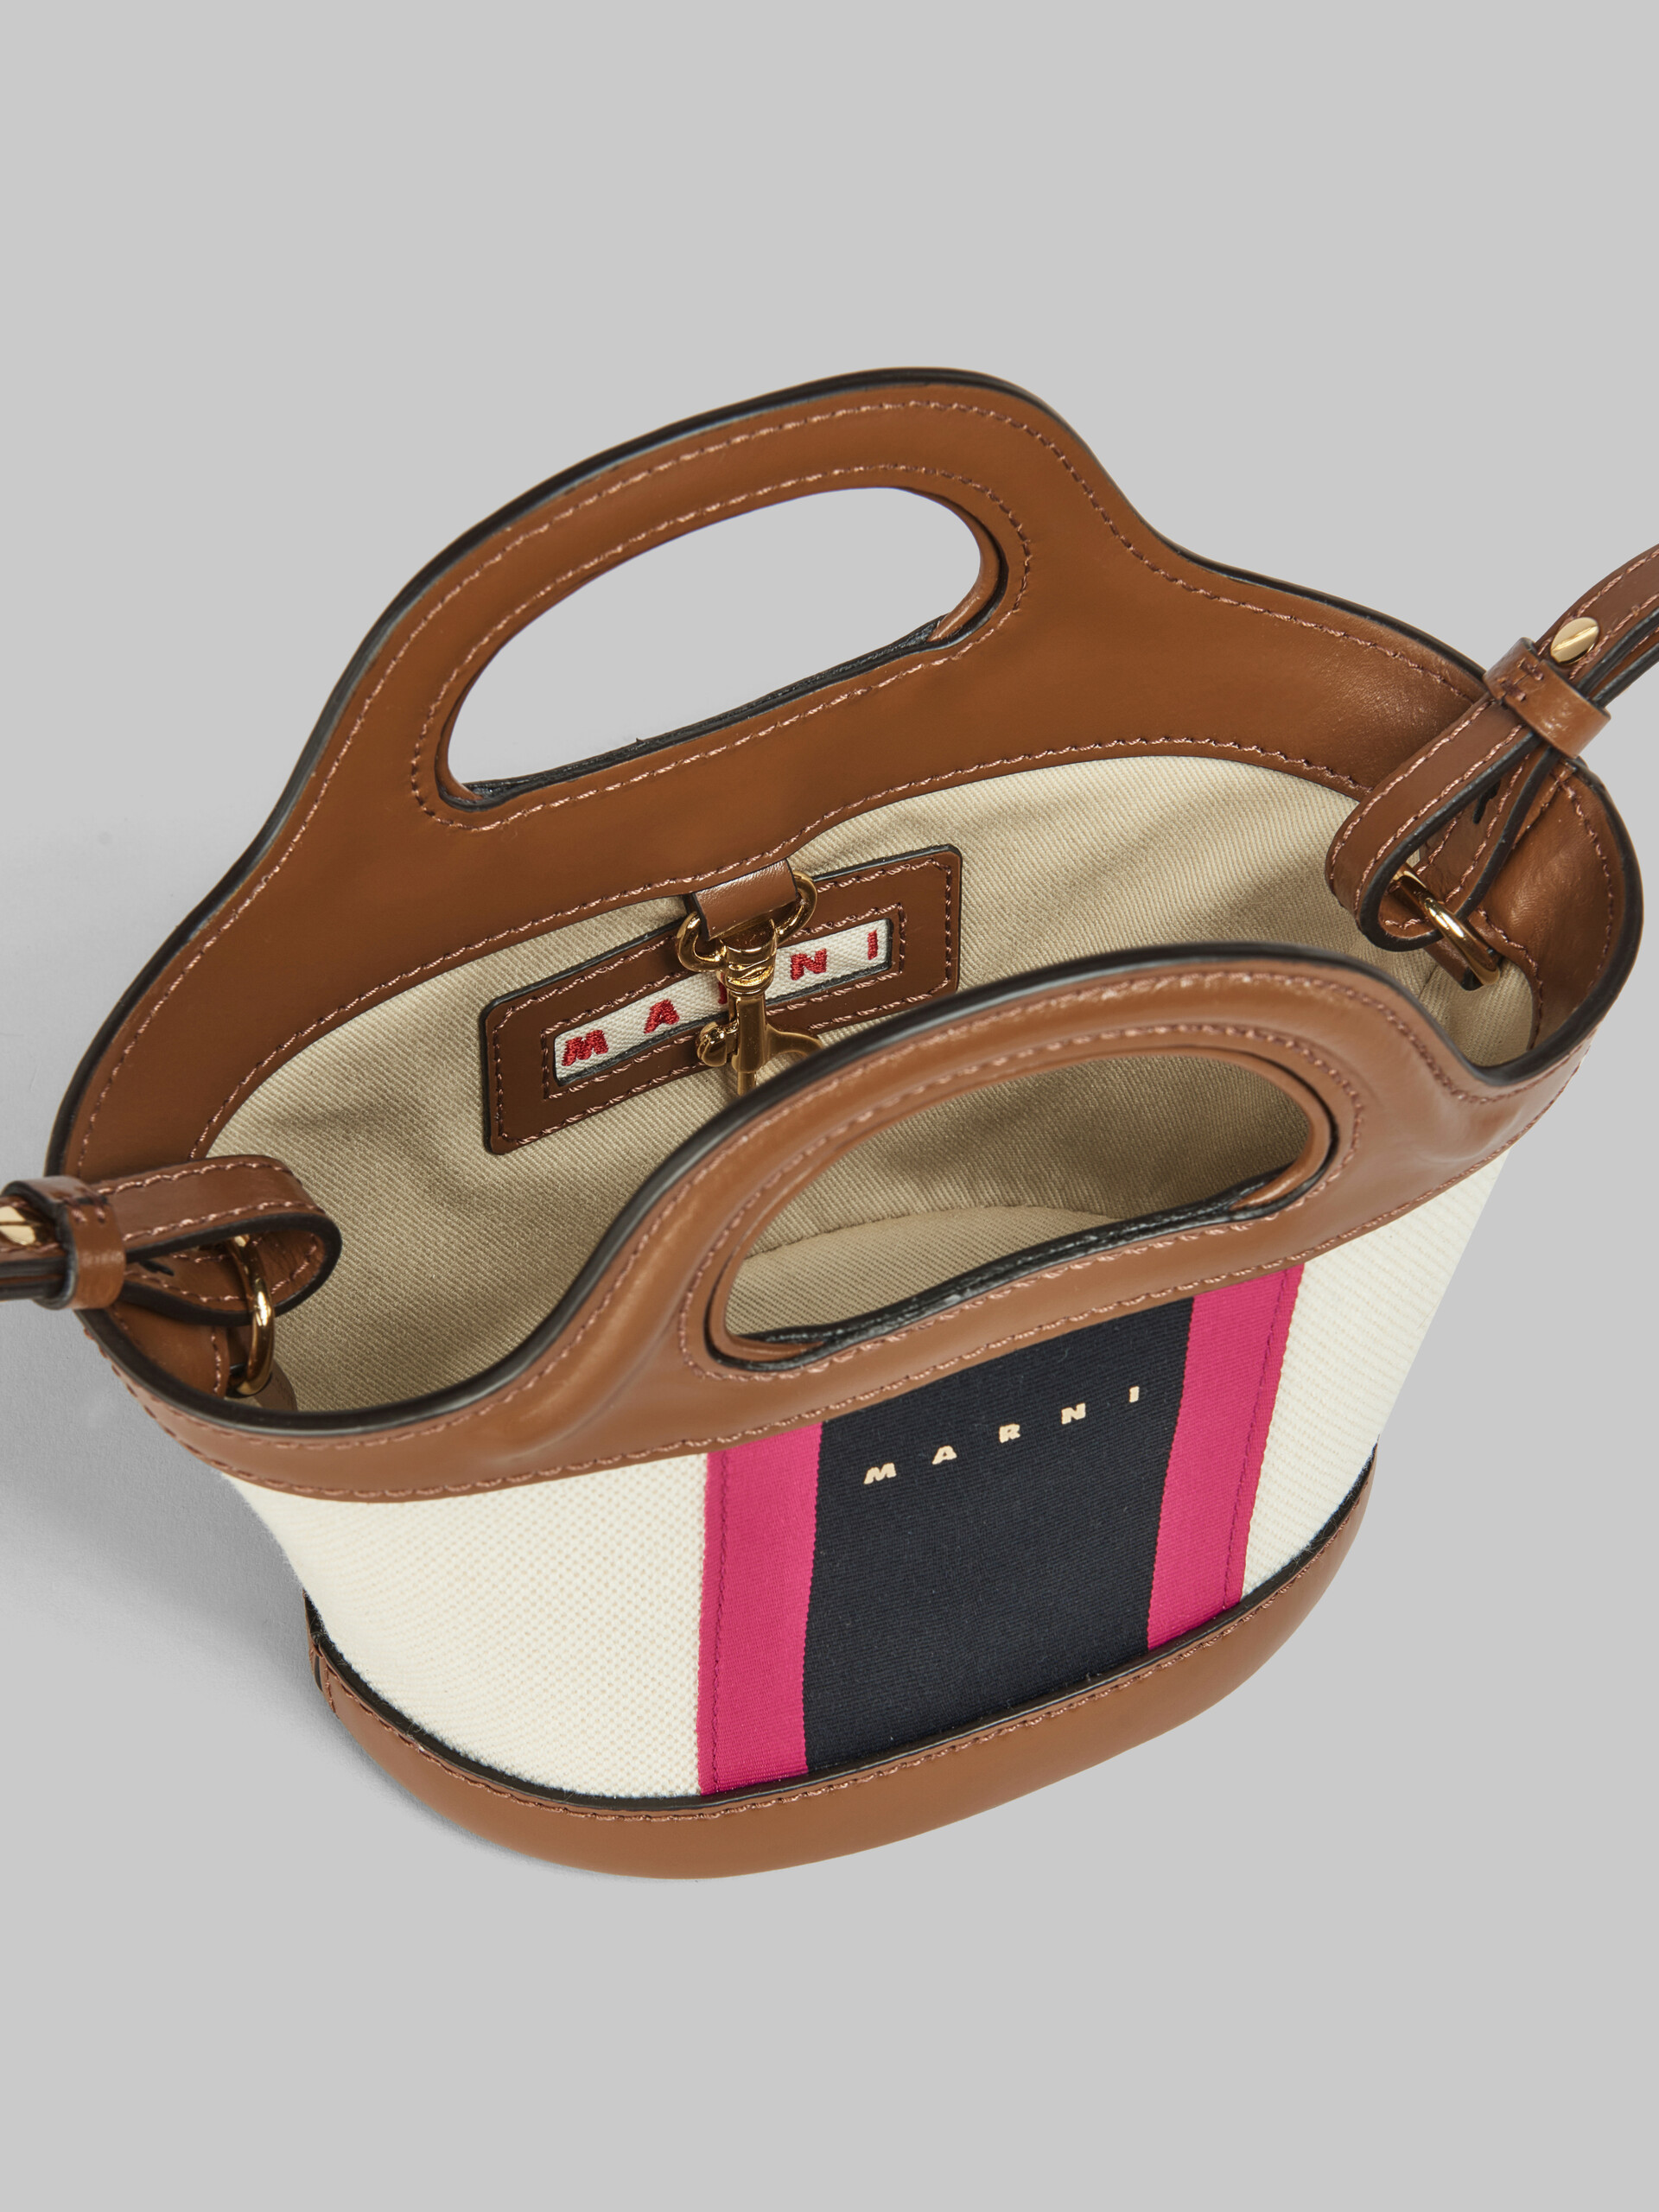 Tropicalia Micro Bag in Brown leather and striped canvas - Handbags - Image 4